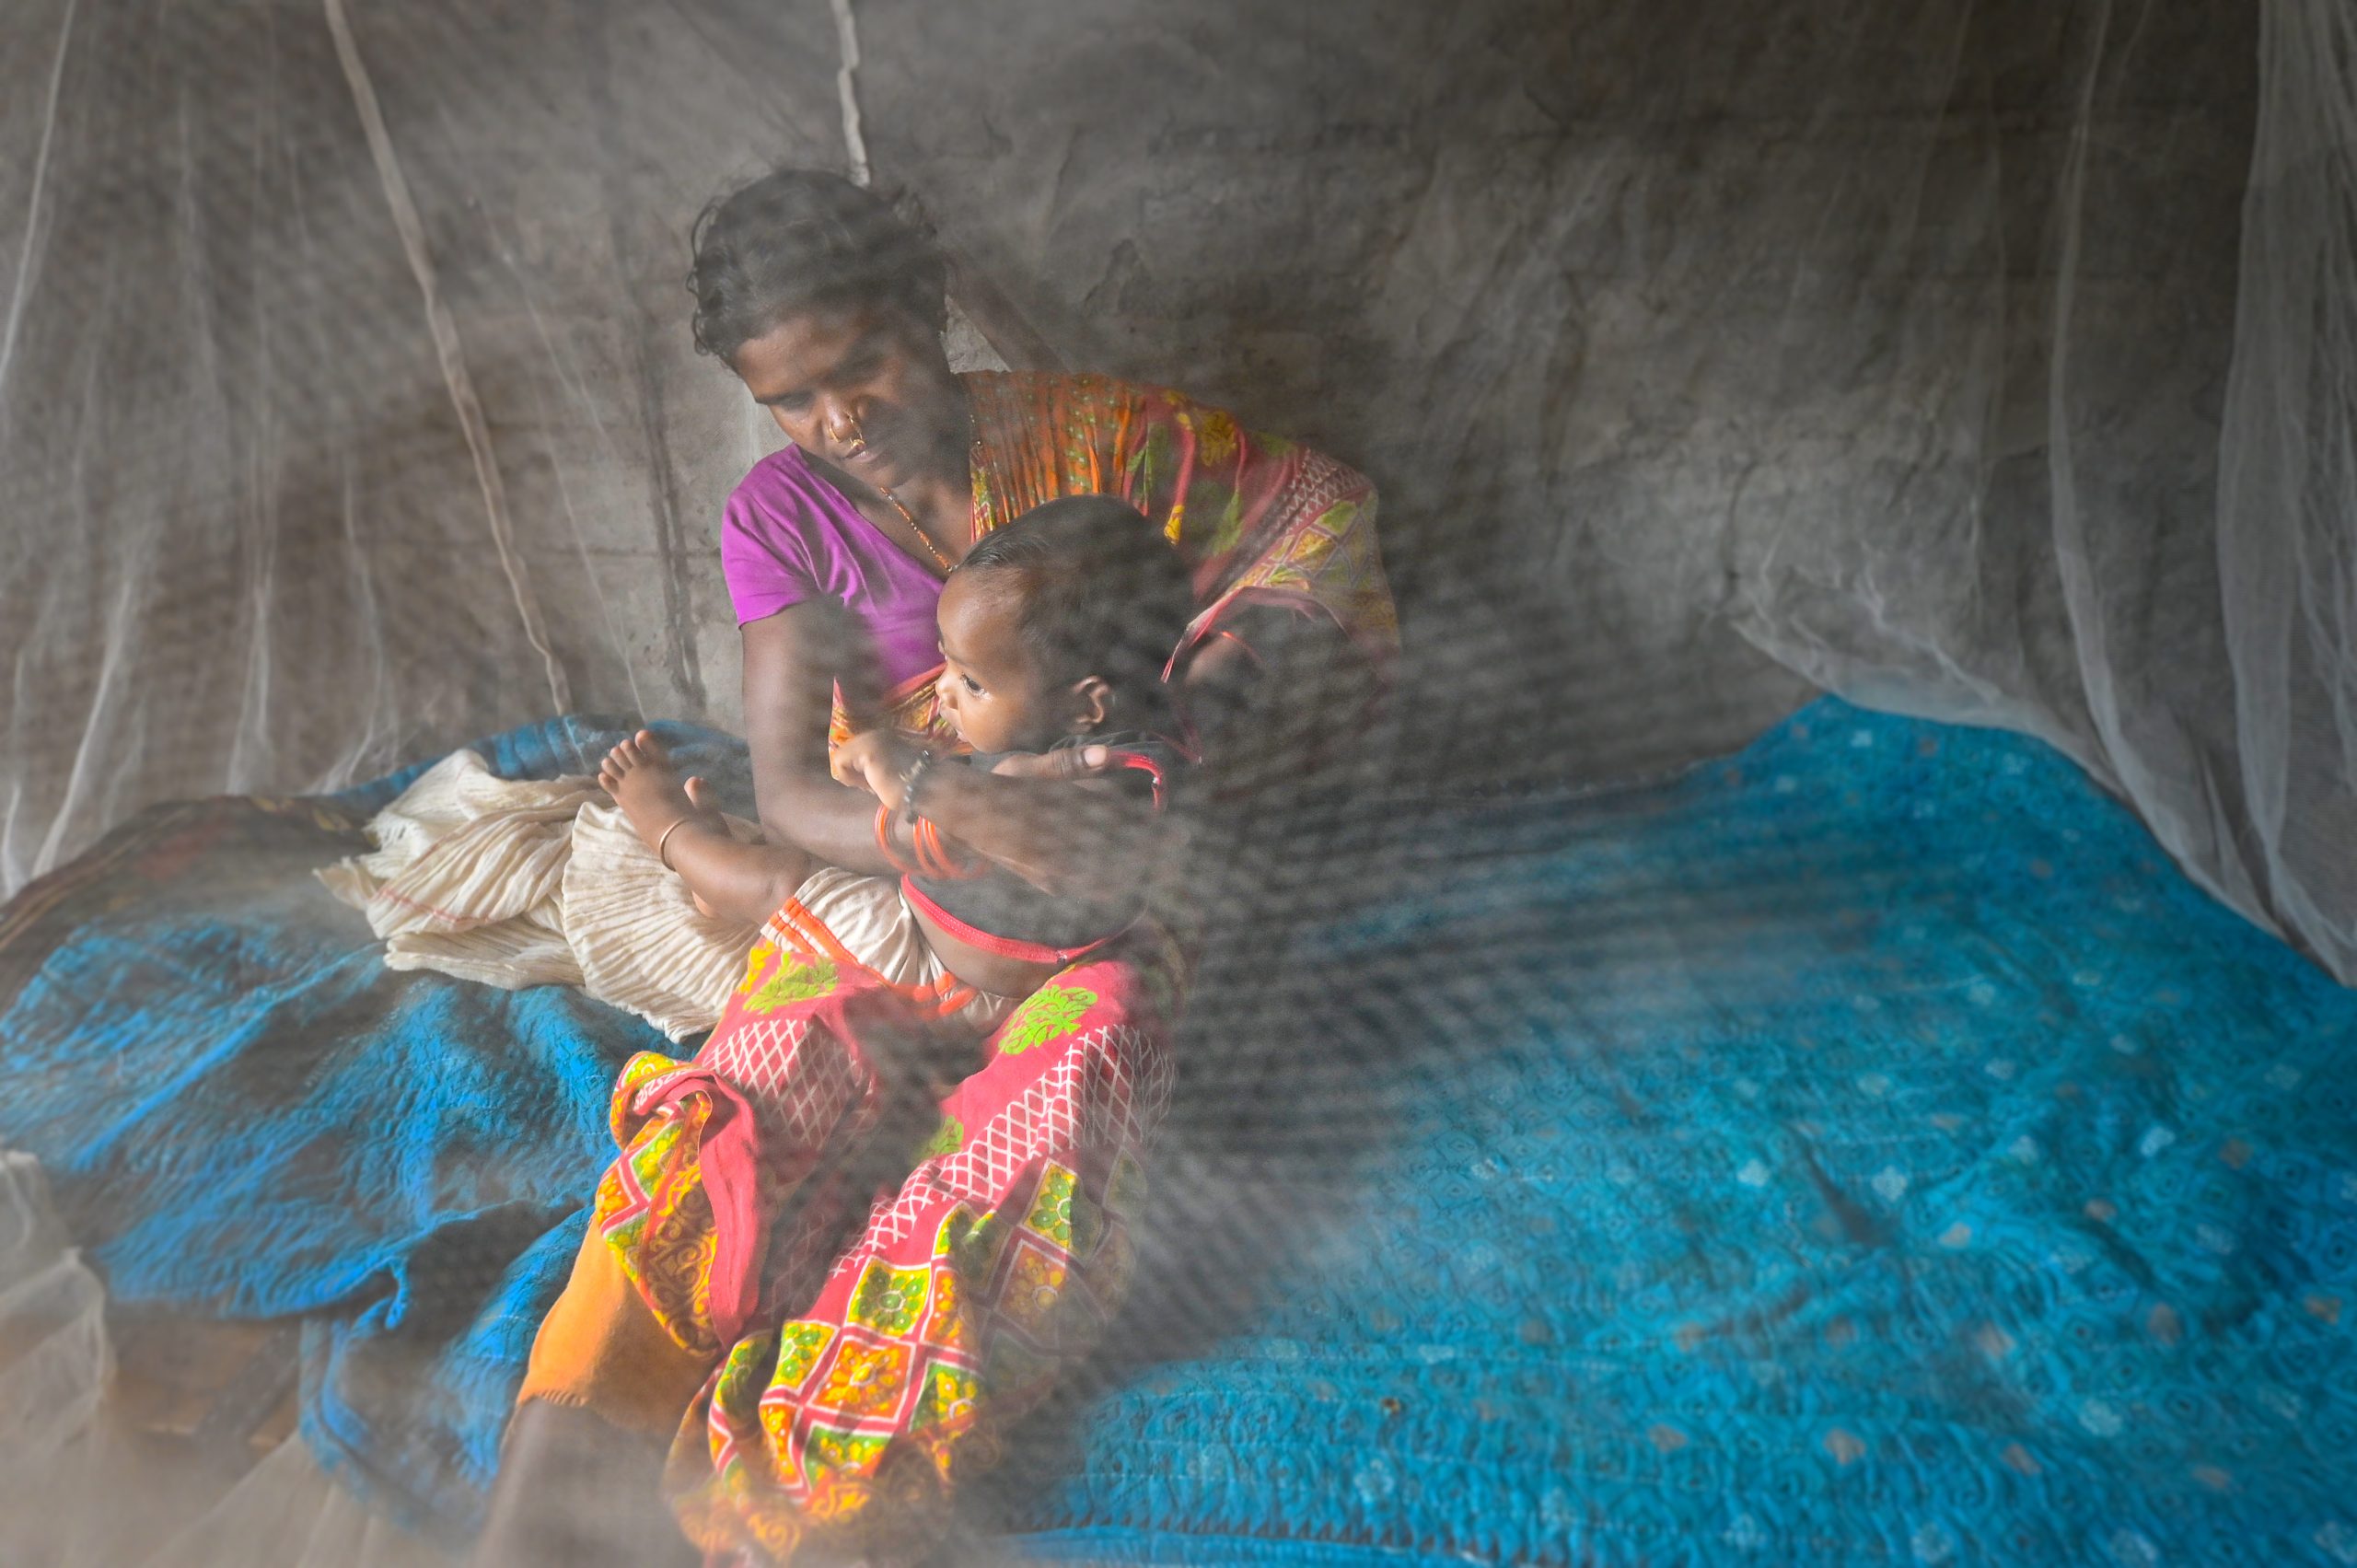 A mother and her baby under a mosquito net, India, 2022. Photograph: Malaria No More A mother and her baby under a mosquito net, India, 2022. Photograph: Malaria No More